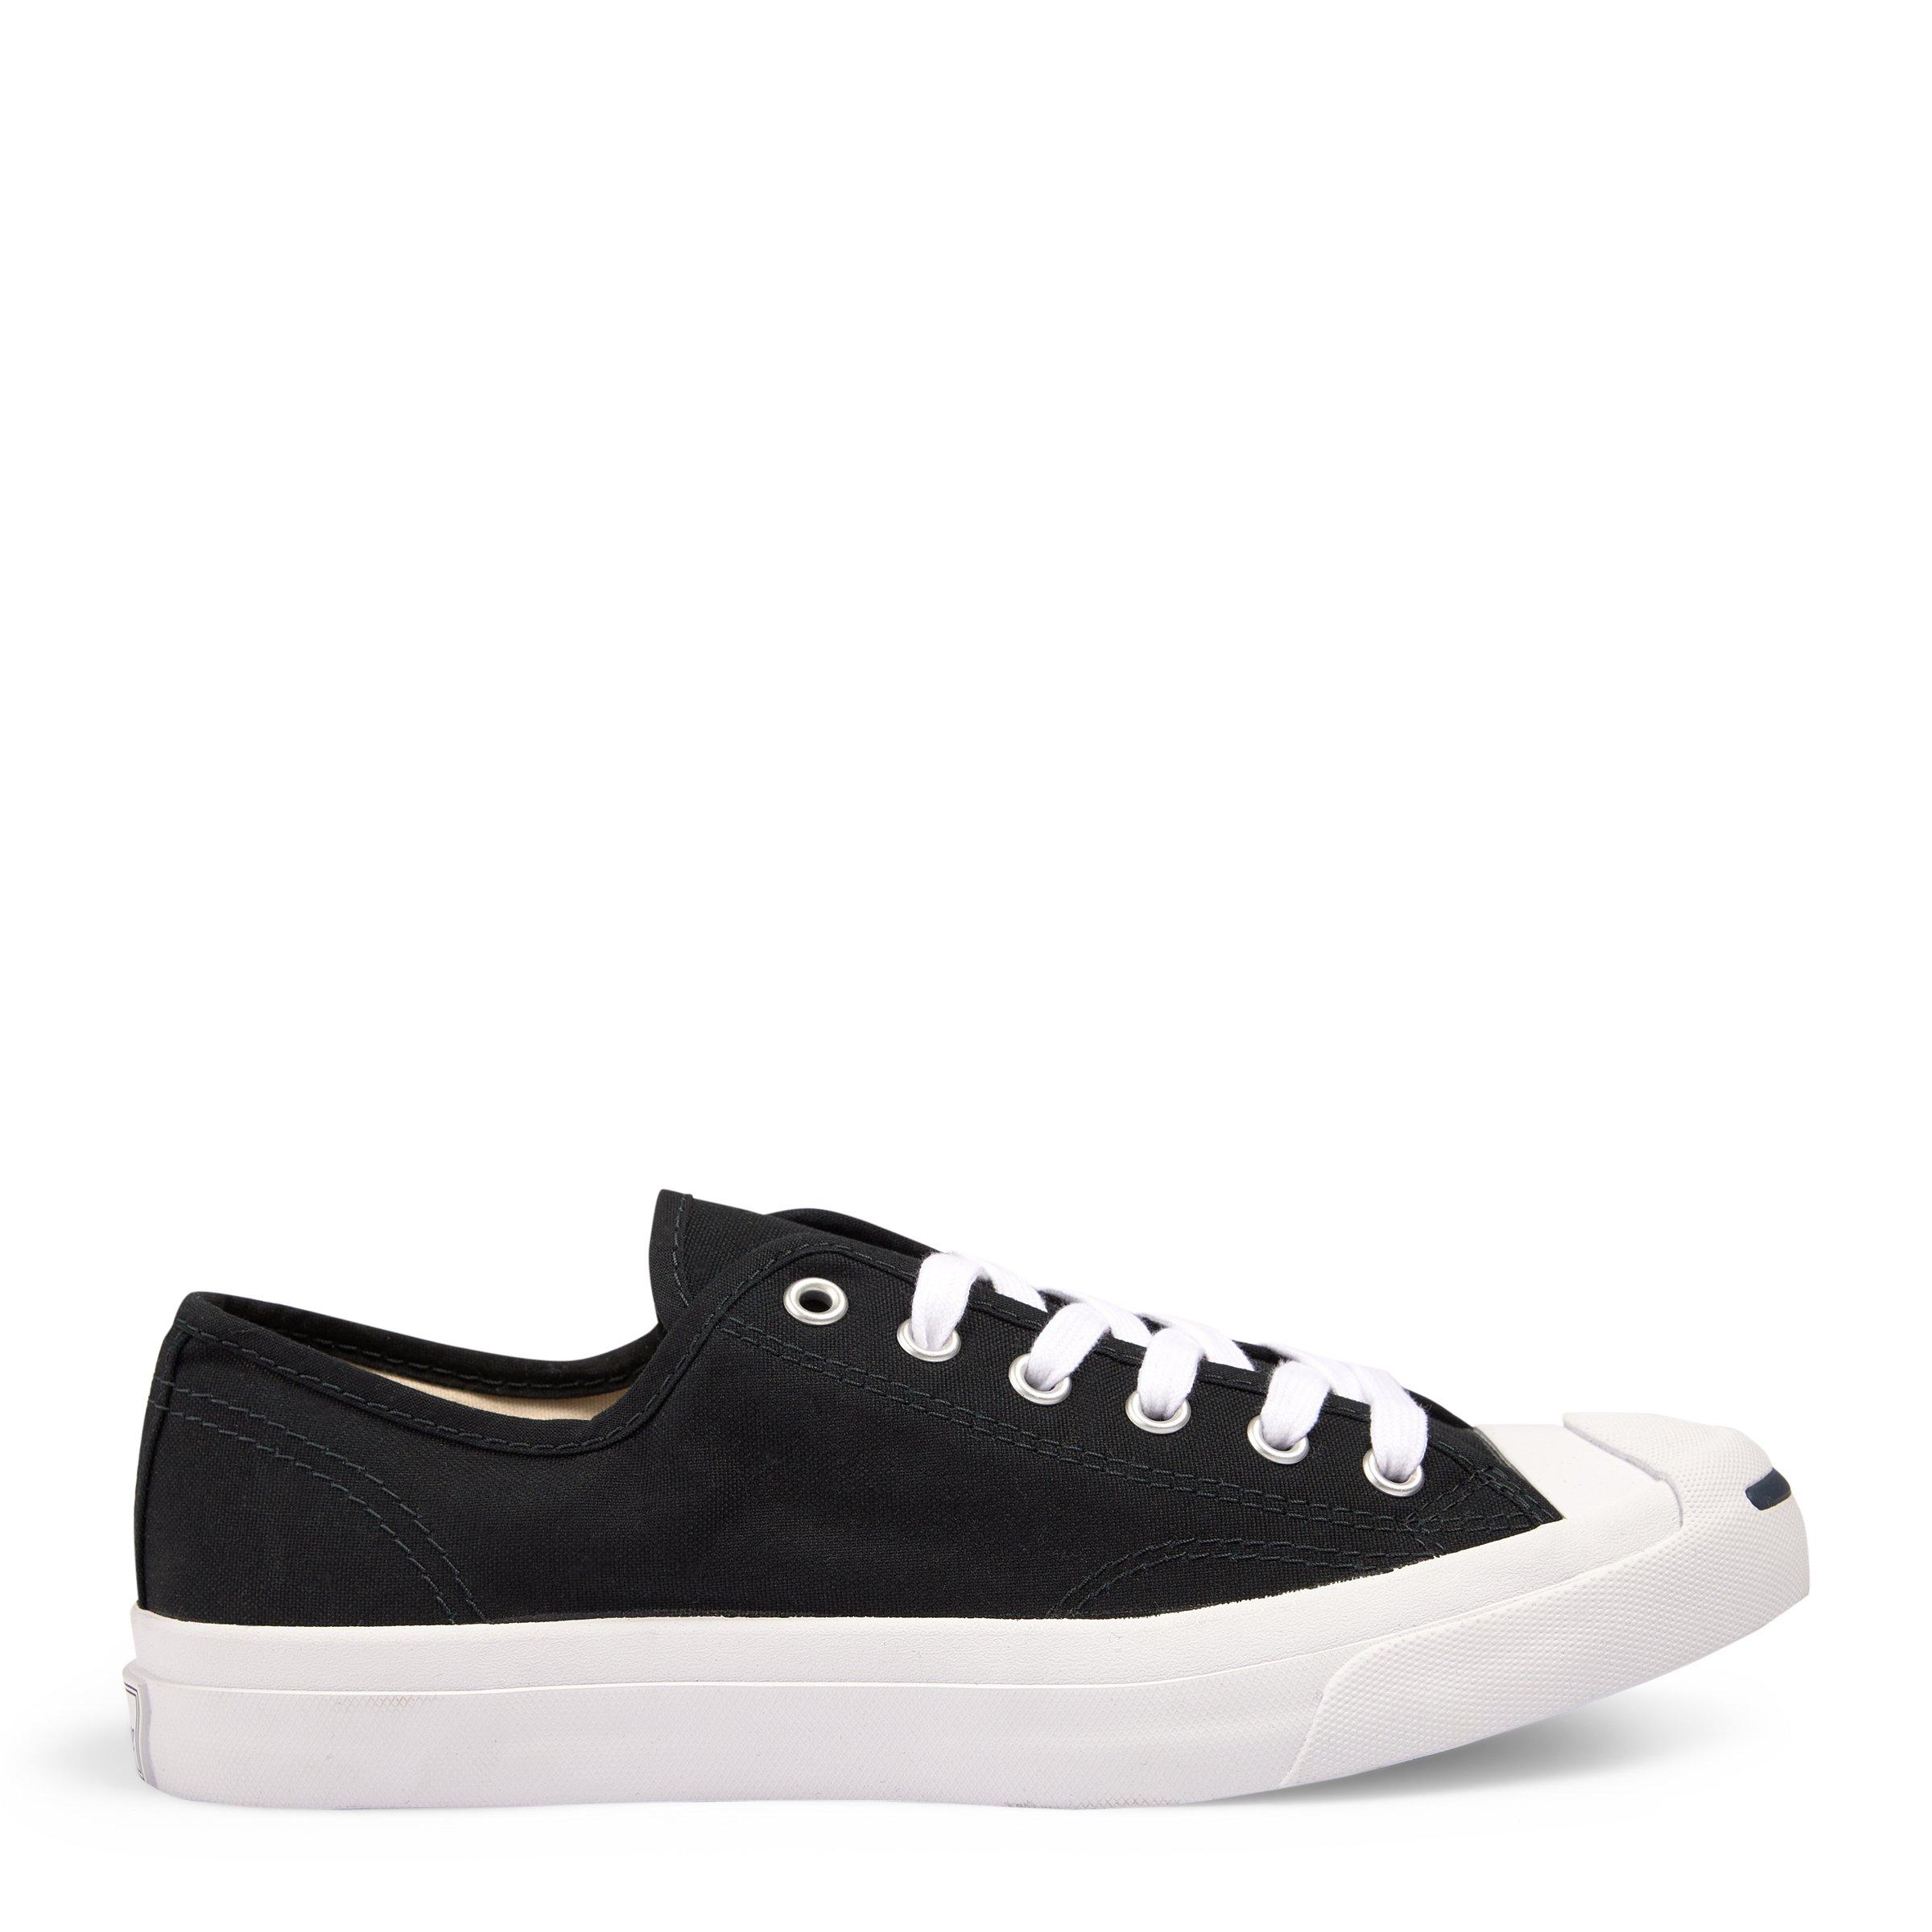 Black Jack Purcell Sneakers (3141124) | Converse